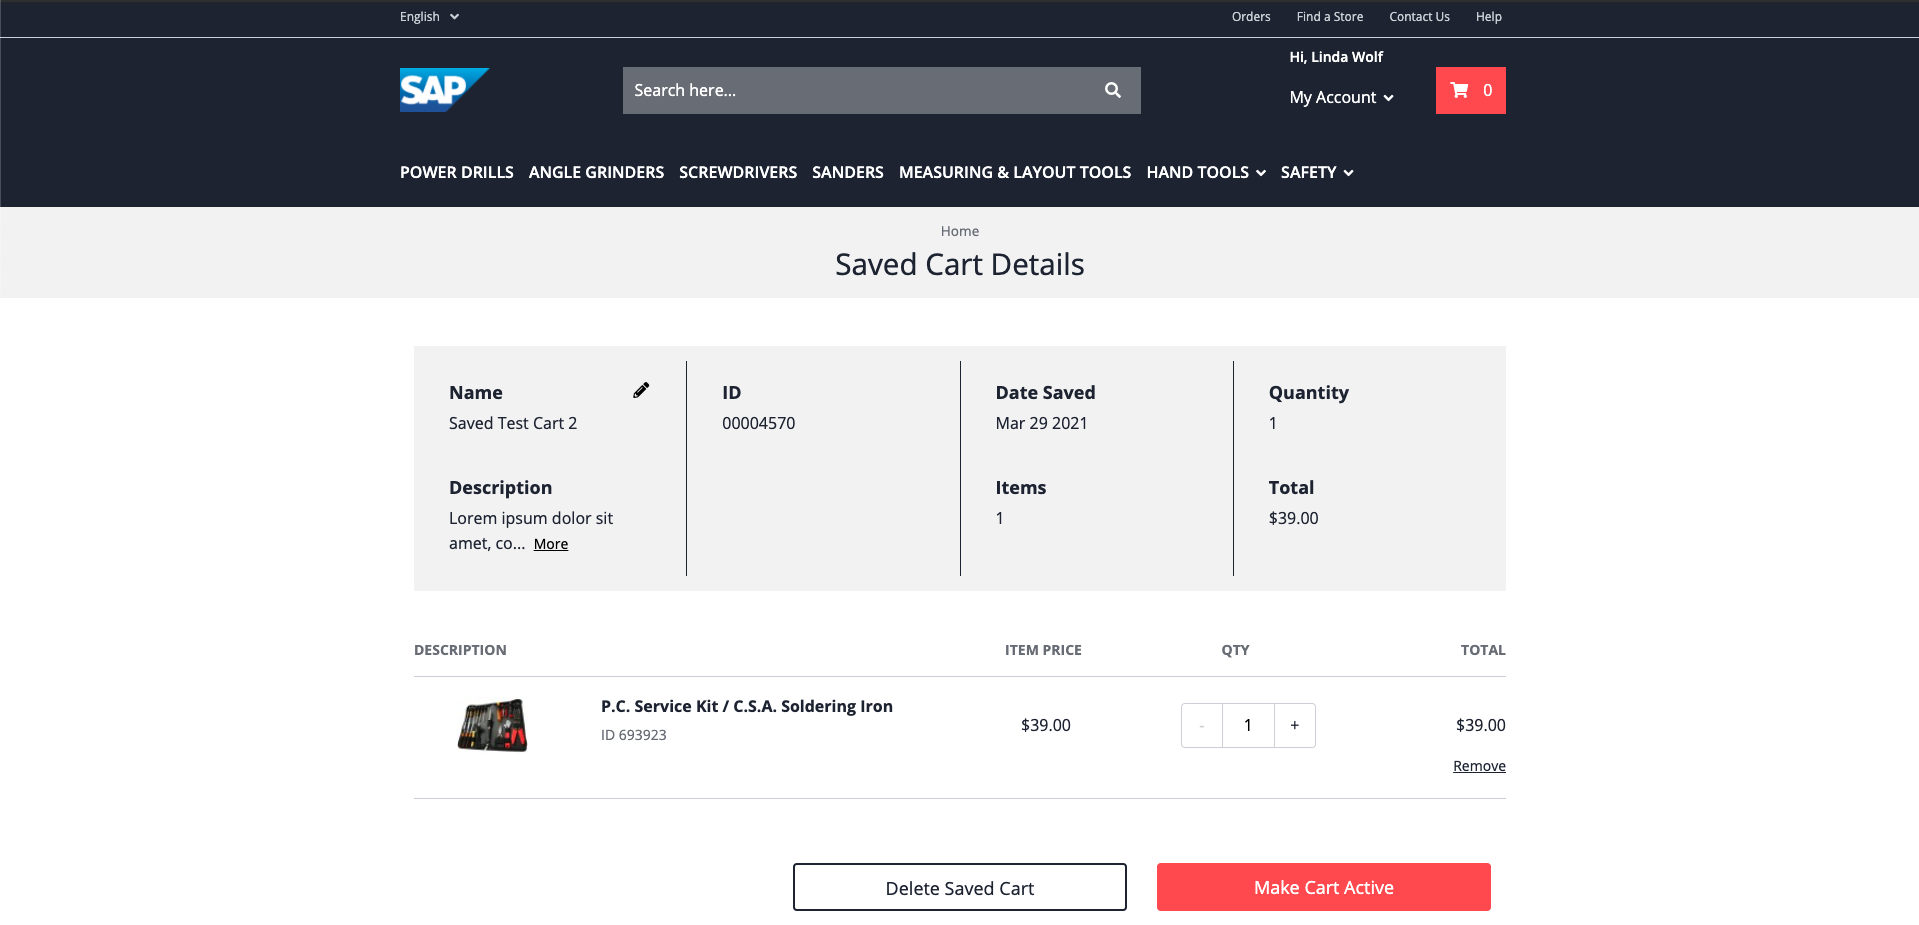 Saved Carts Details Page